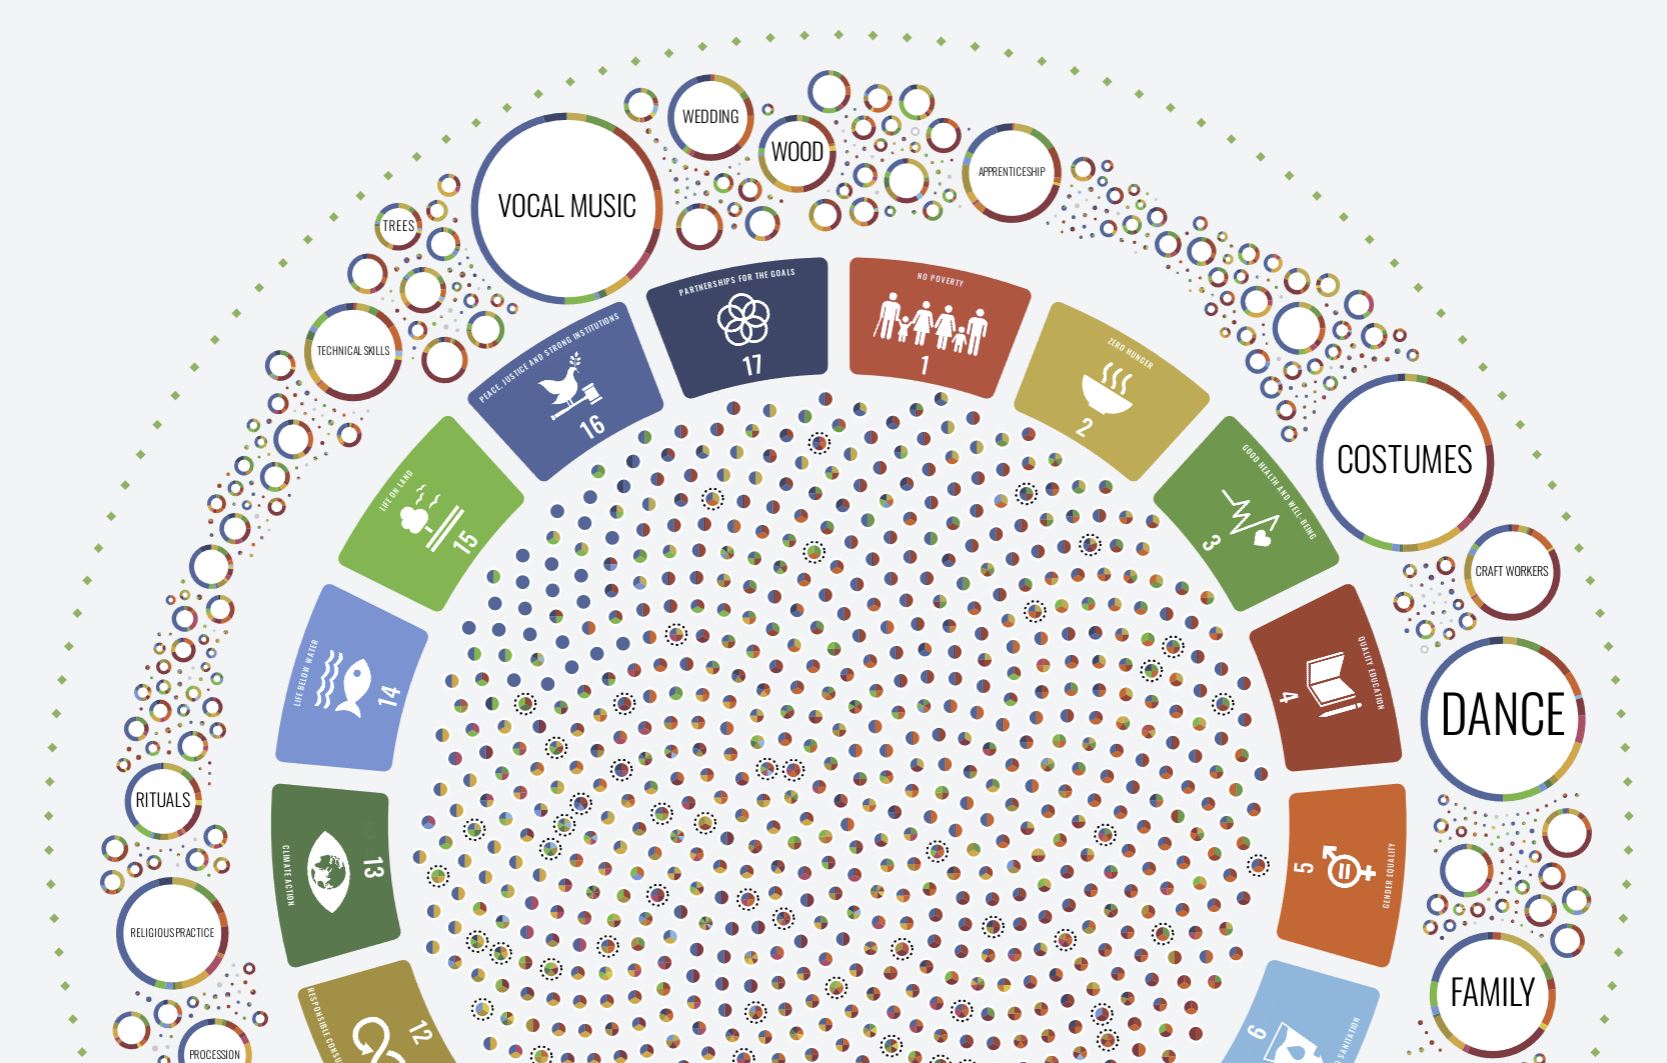 Snapshopt of an interactive map of nearly 500 elements of intangible cultural heritage curated by UNESCO with web semantics and overlaid into their networked relationships to the 17 United Nations (UN) Sustainable Development Goals (SDGs). (Image source: UNESCO Dive Into Intangible Cultural Heritage)